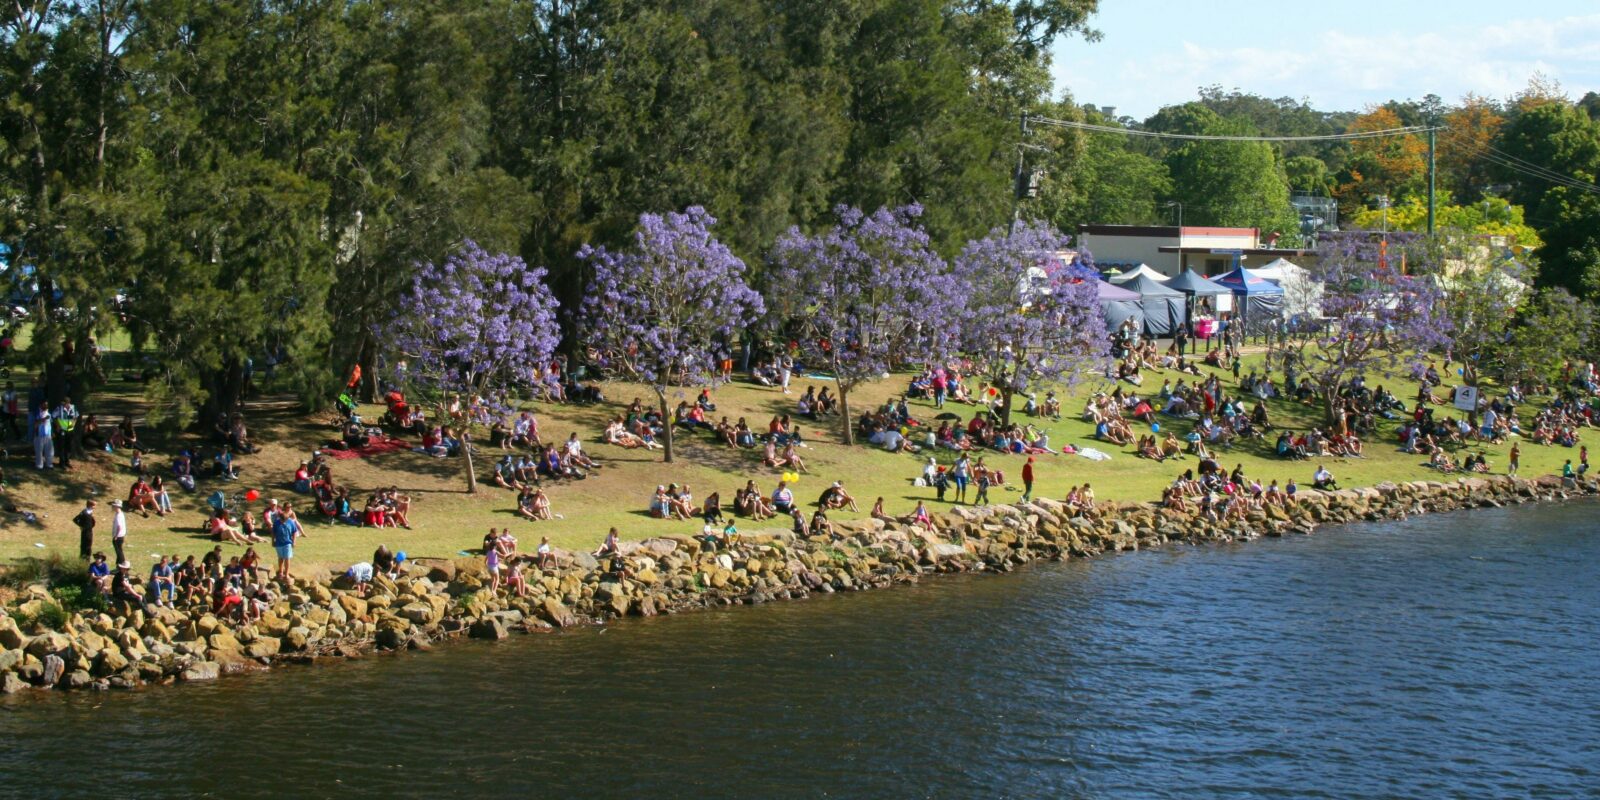 Crowds enjoying the river activities